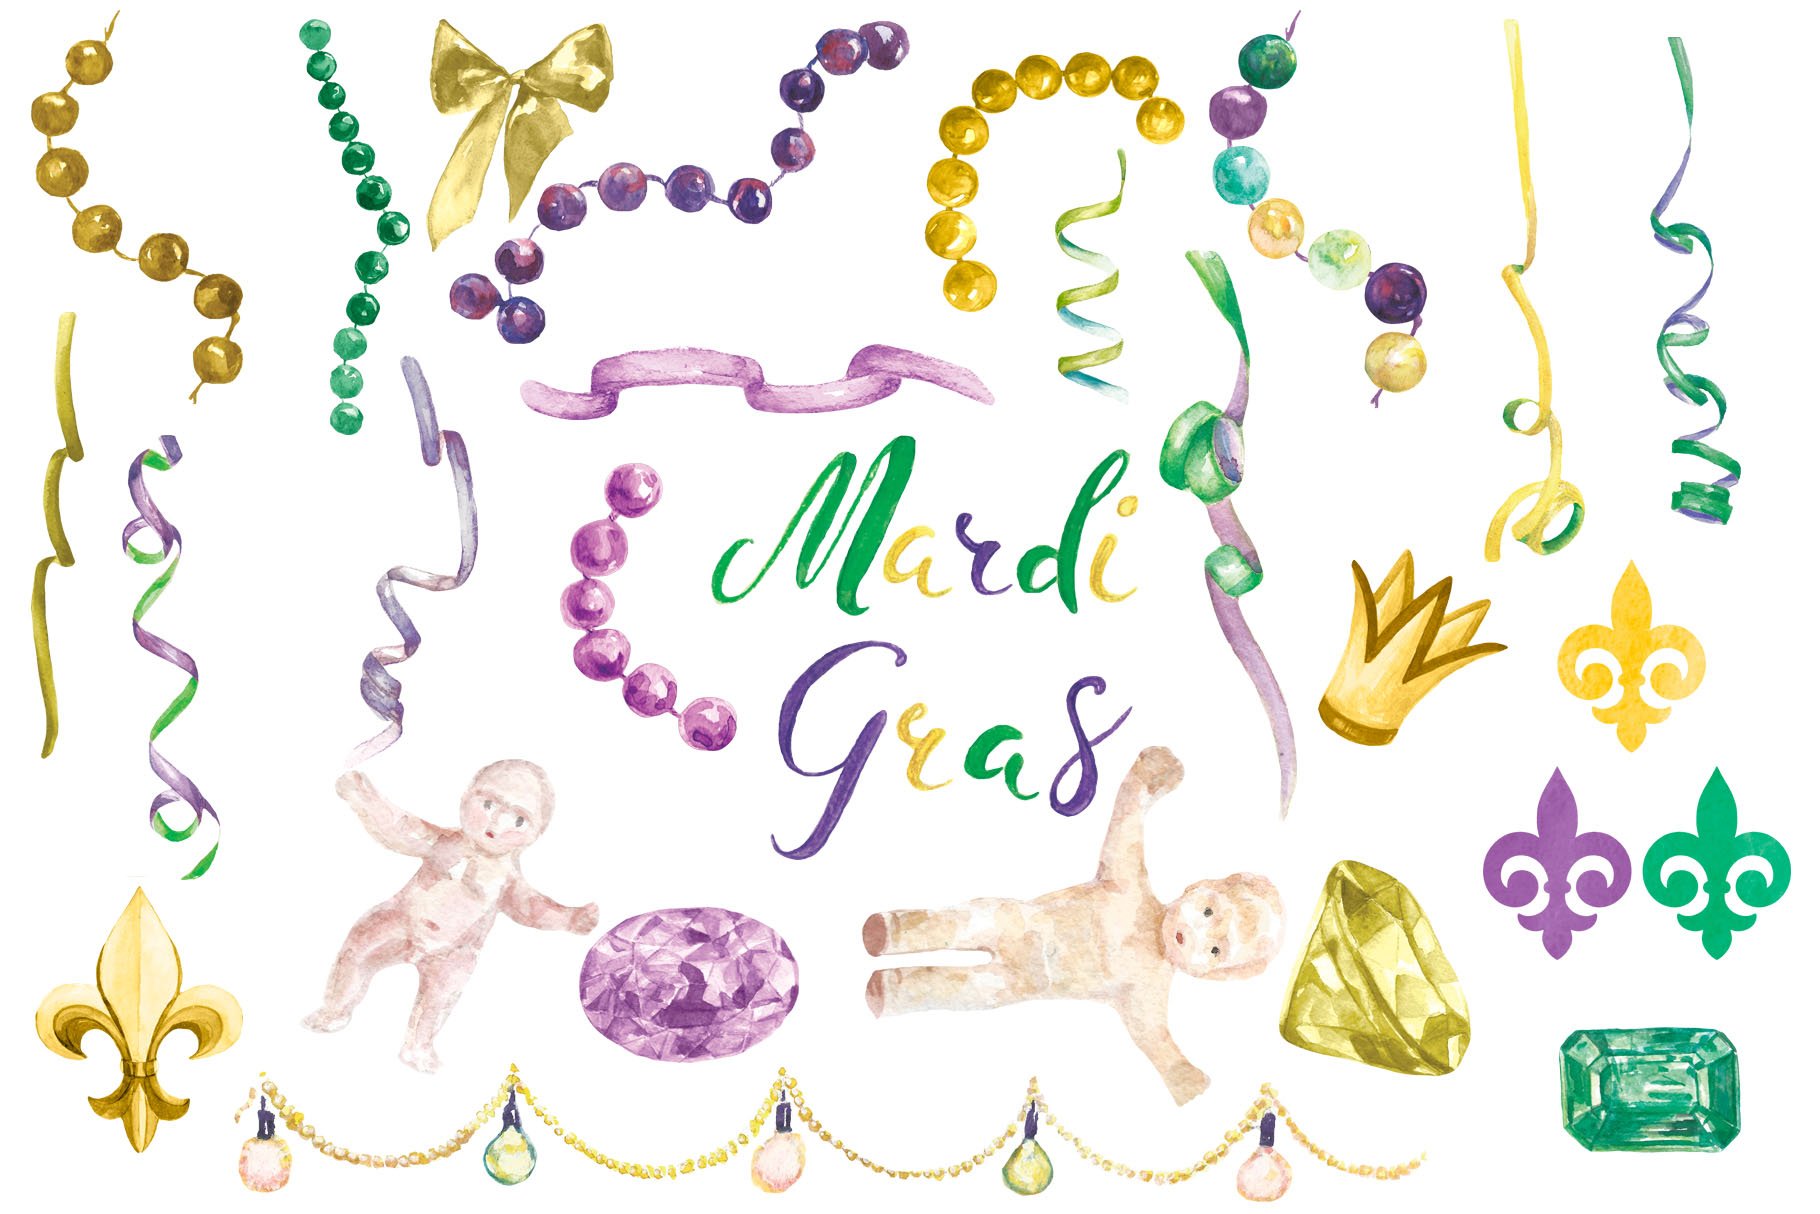 Some nice watercolor elements for the Mardi Gras illustration.